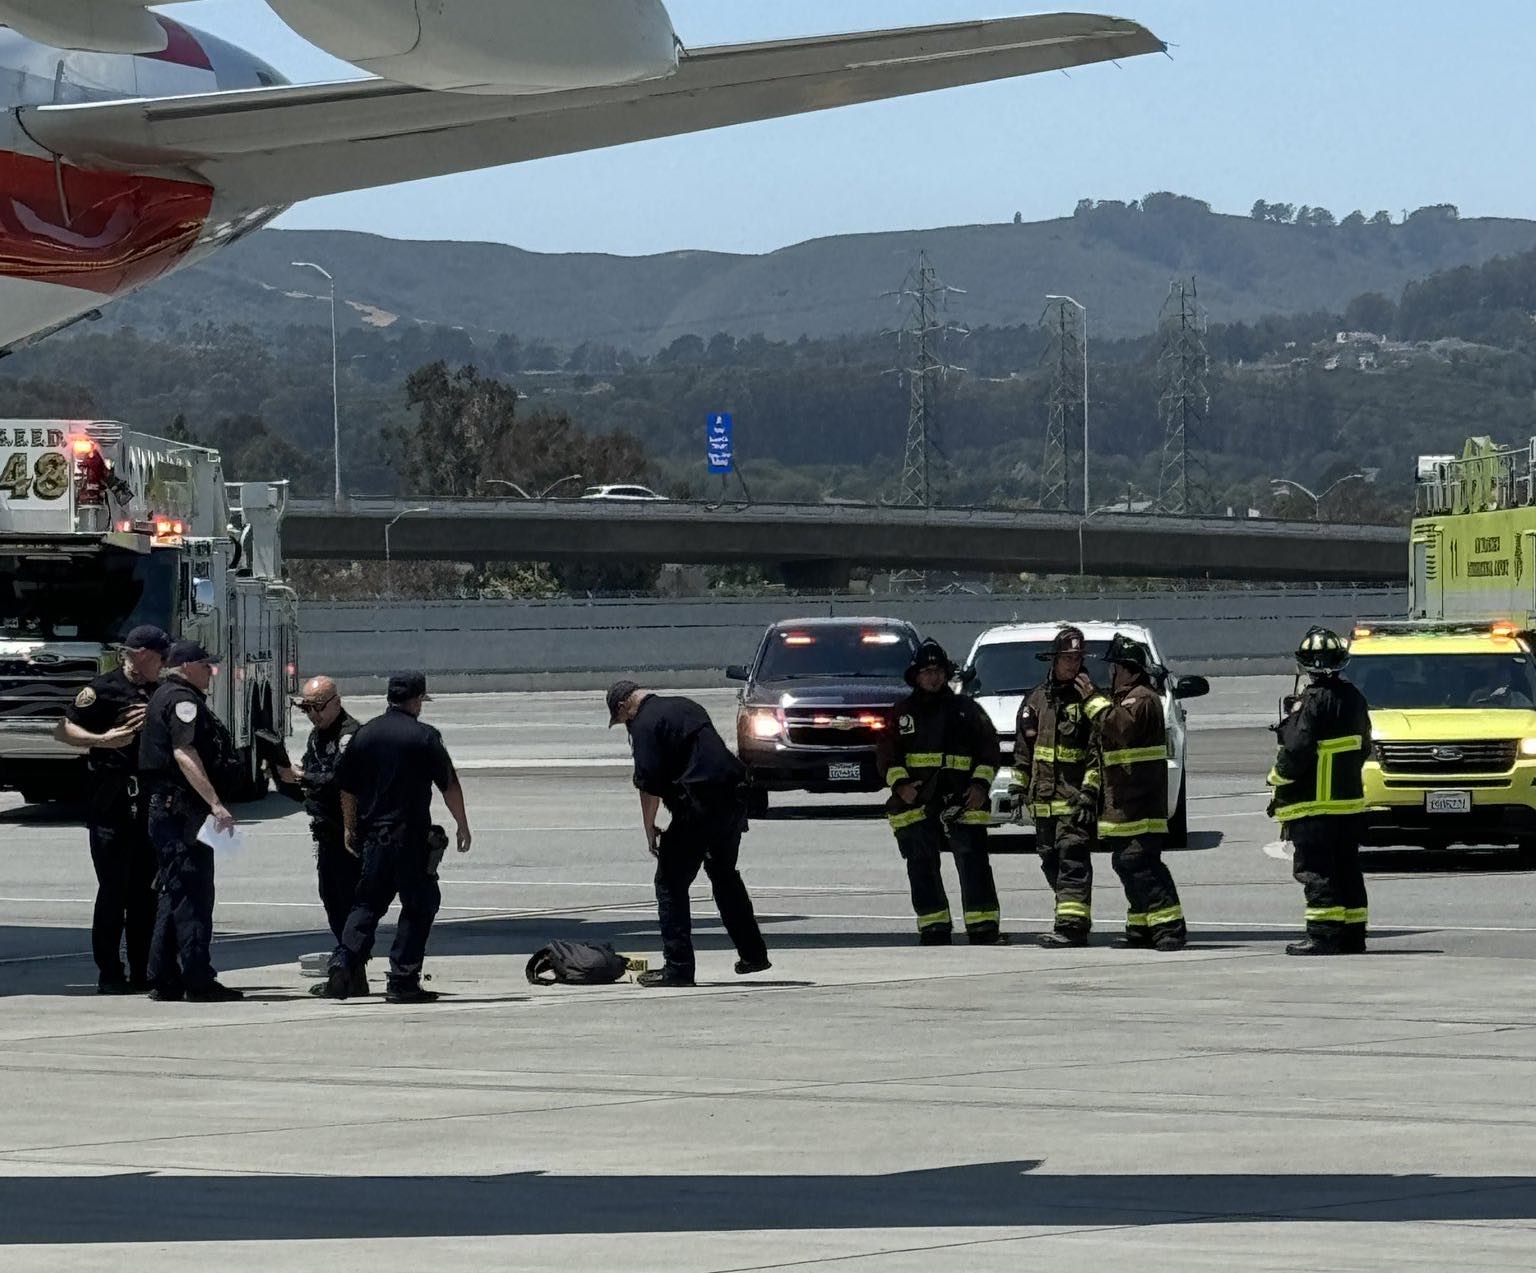 a group of firefighters standing next to a plane